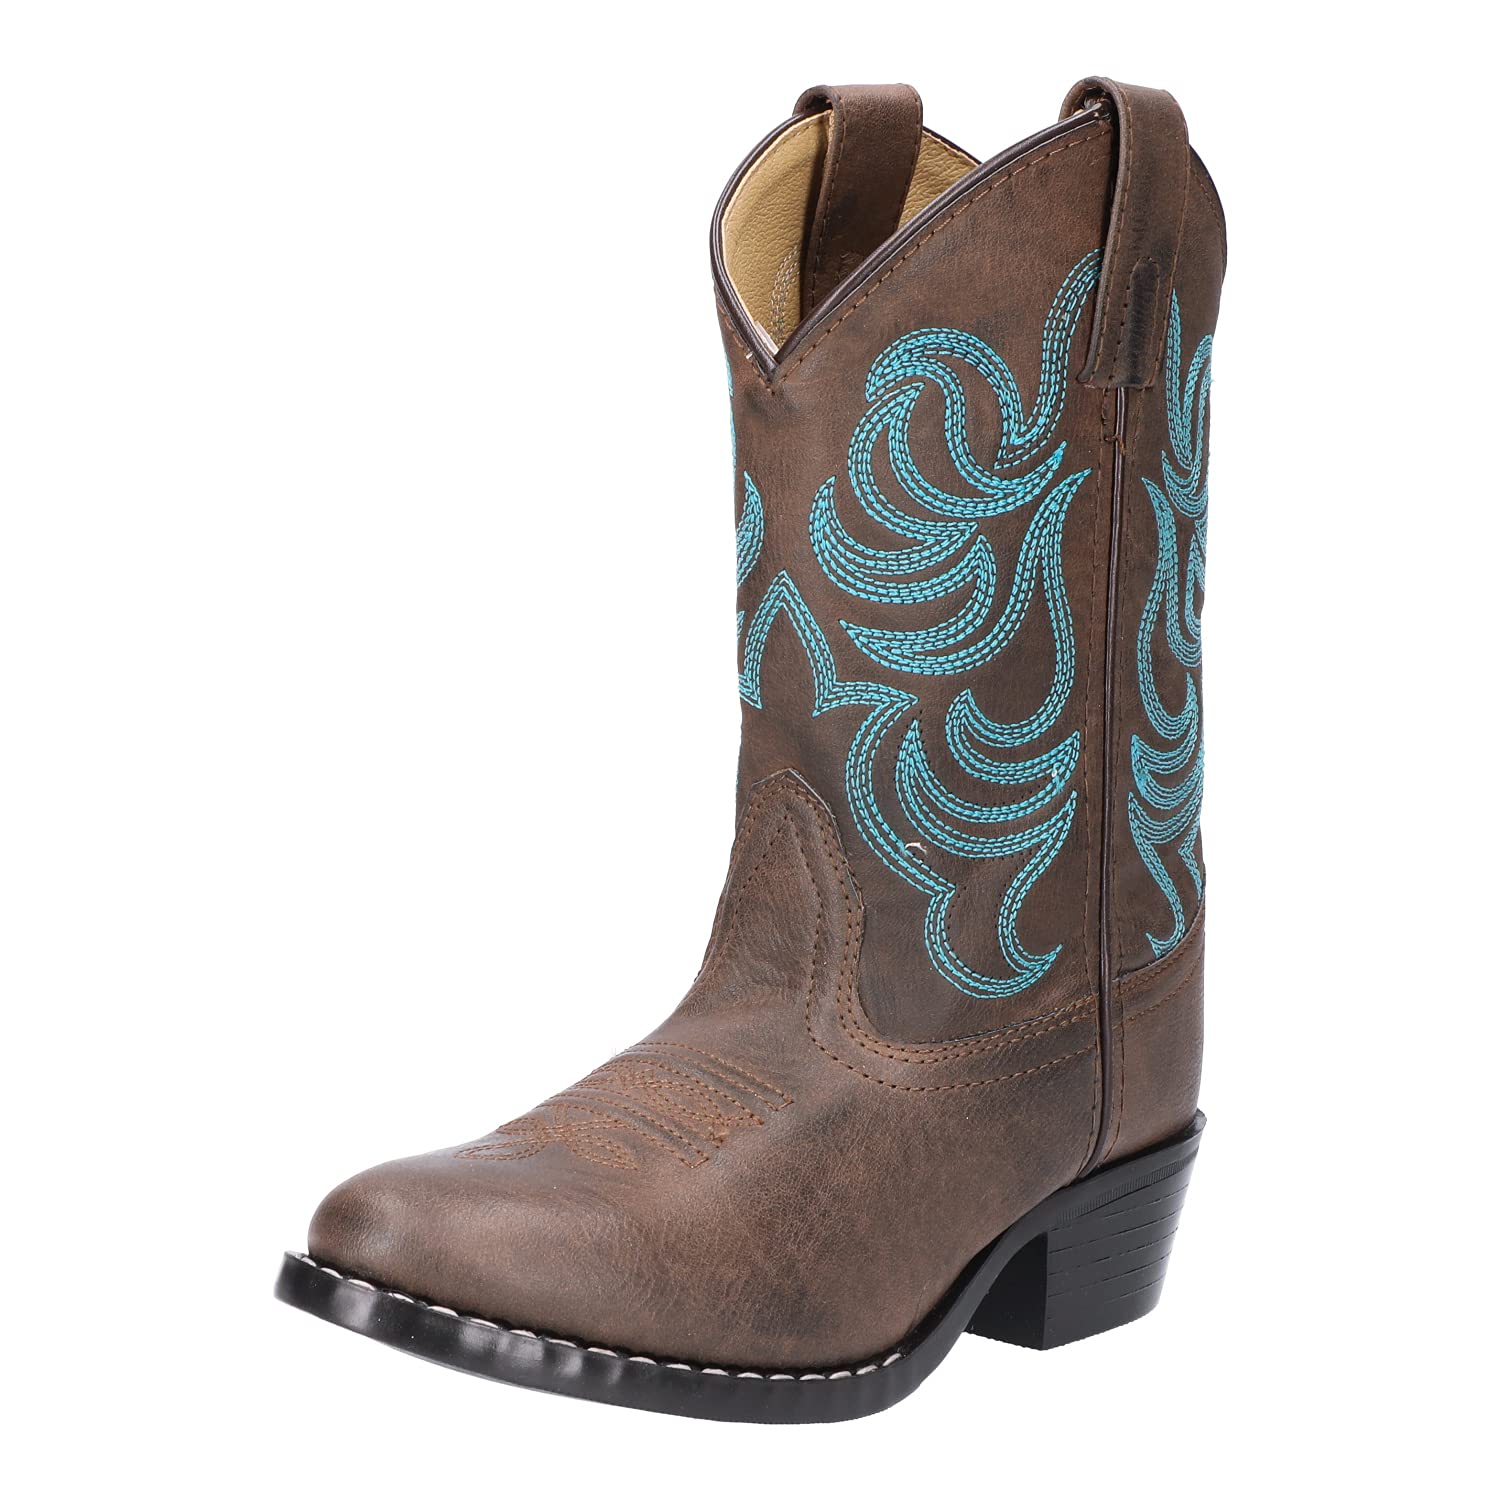 Smoky Mountain Girls Brown with Pink Stitch Monterey Western Cowboy Boots